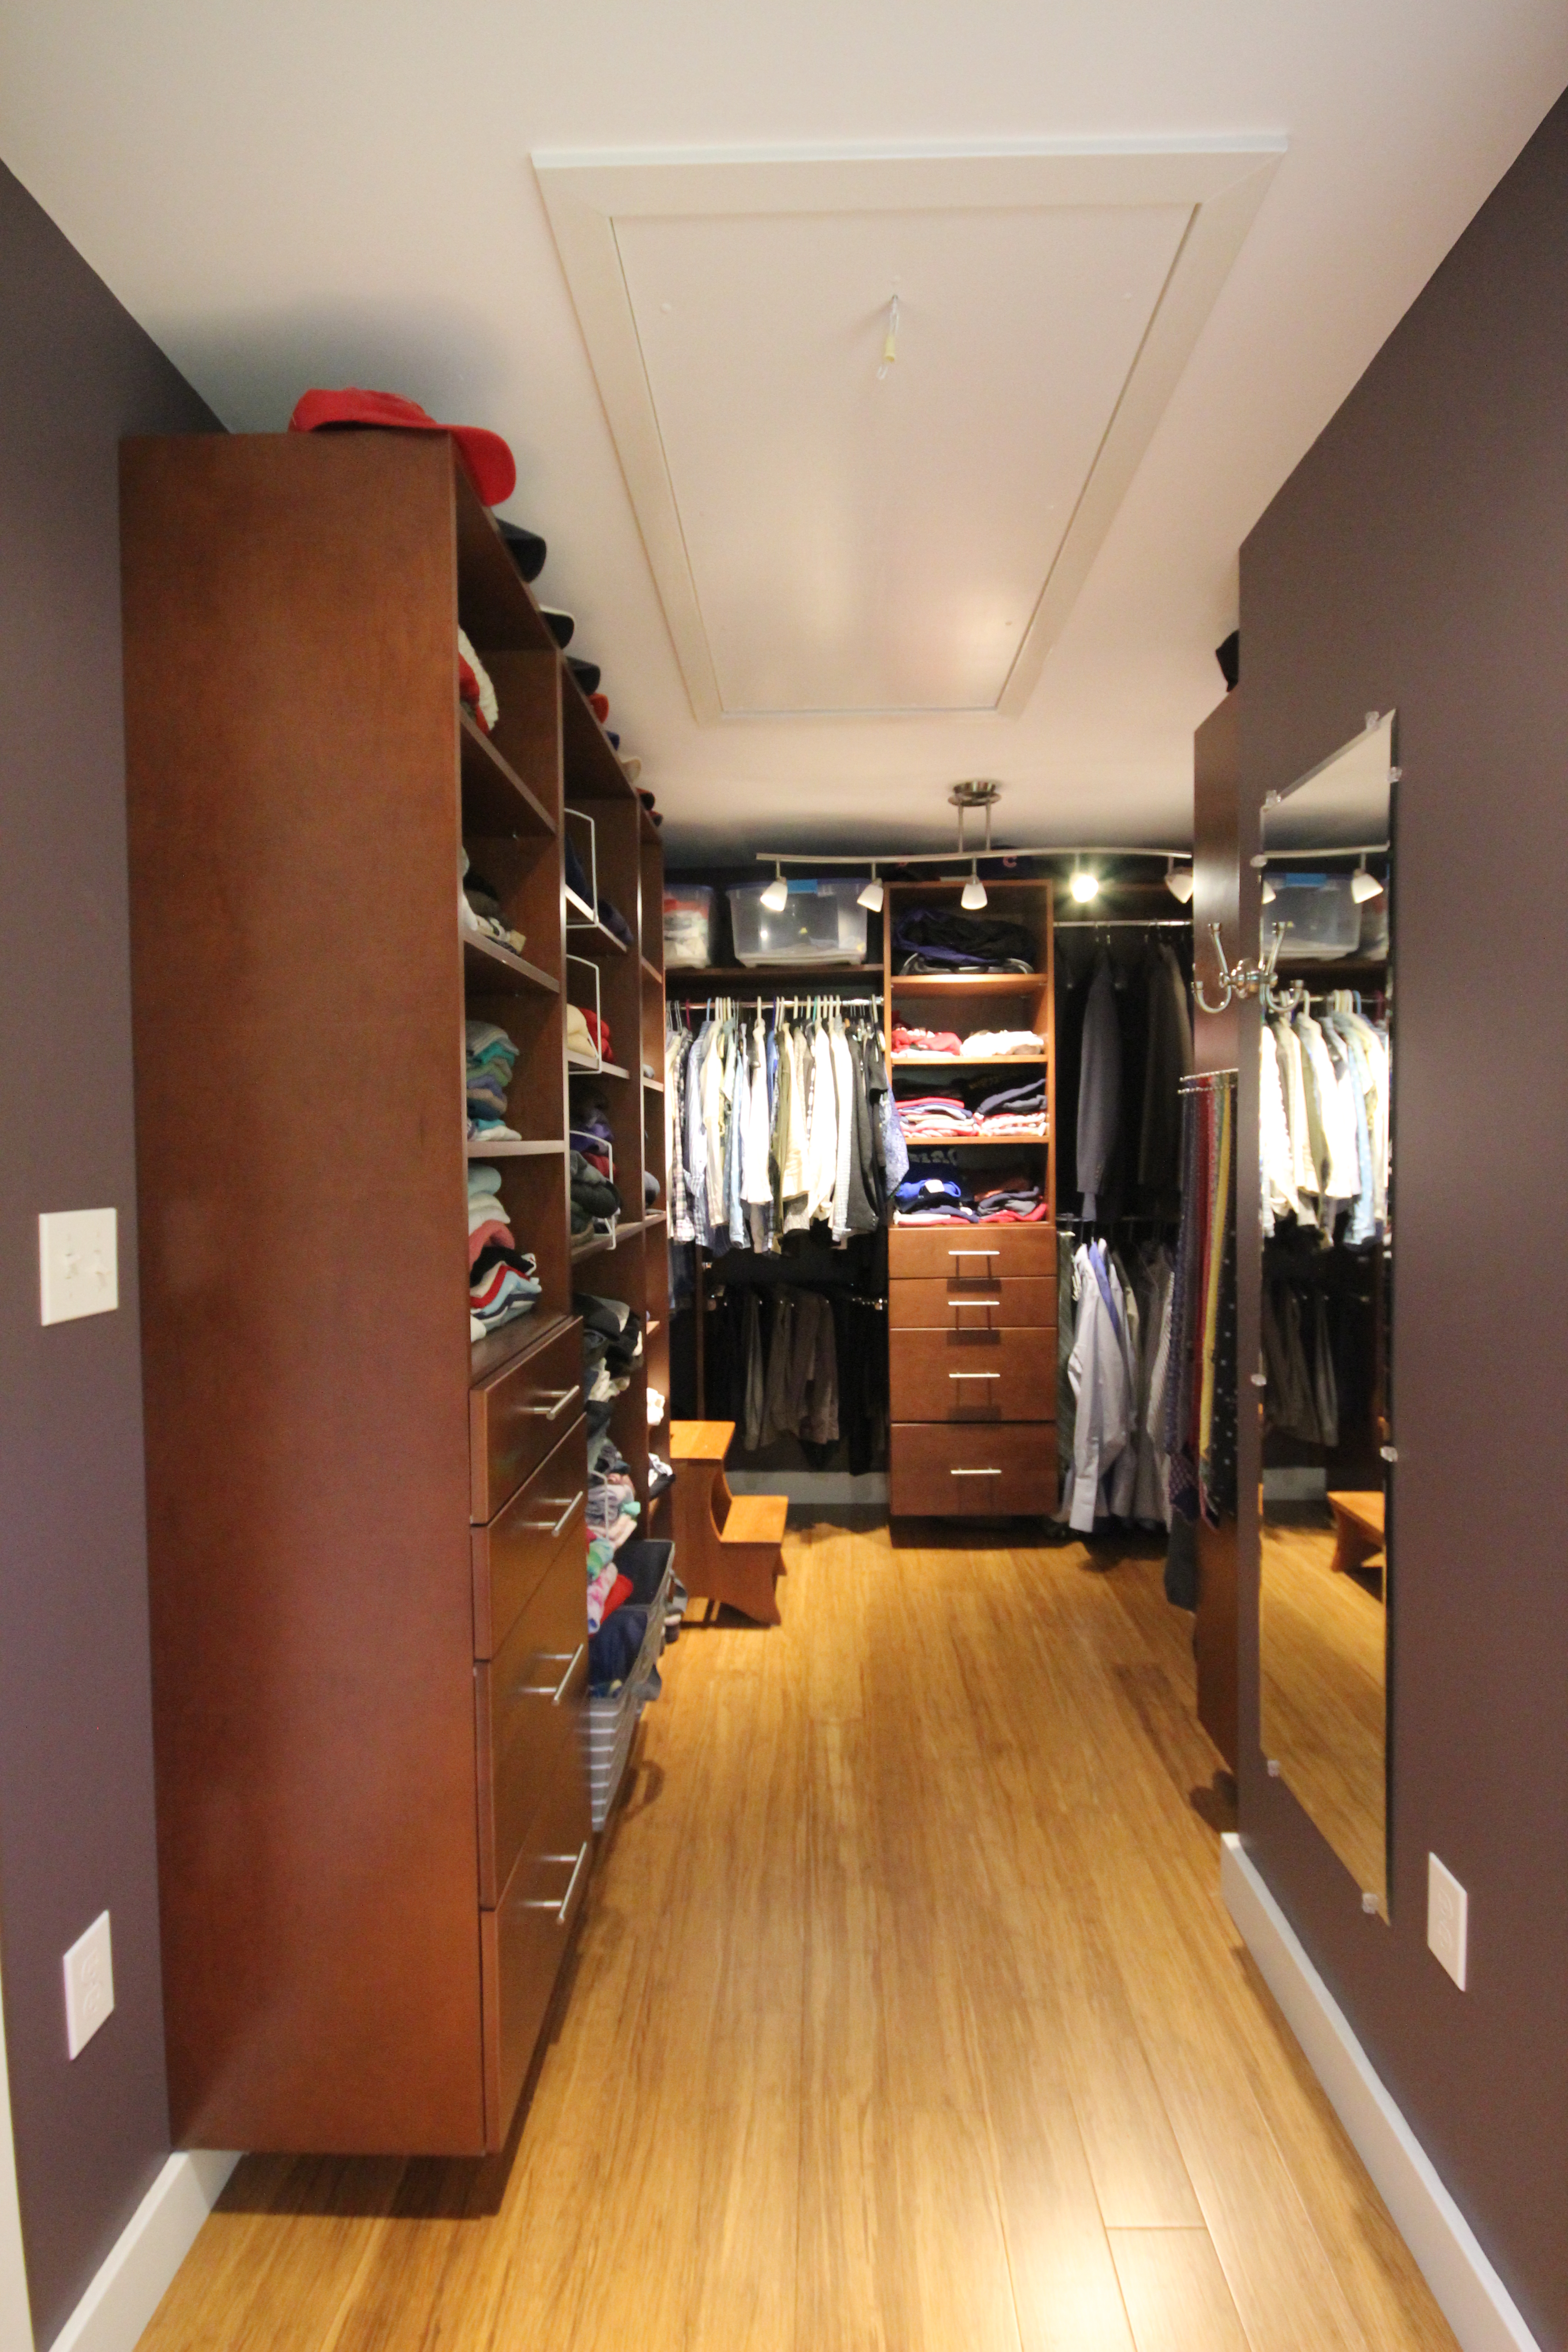 AFTER: HIS AND HER CLOSET